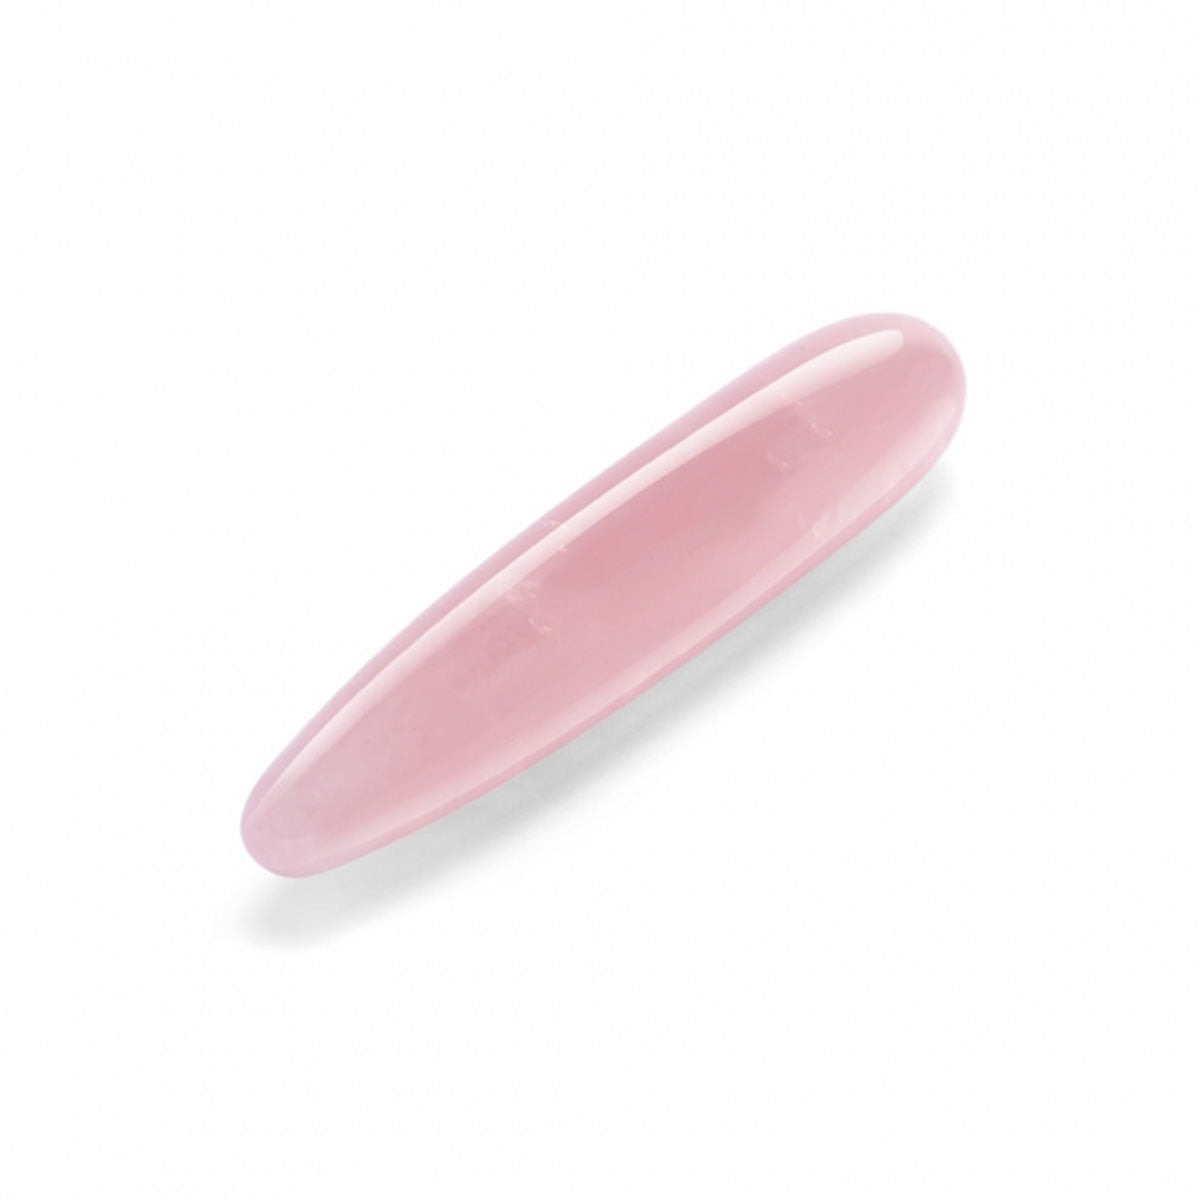 Le Wand Crystal Slim Wand - Assorted Colors